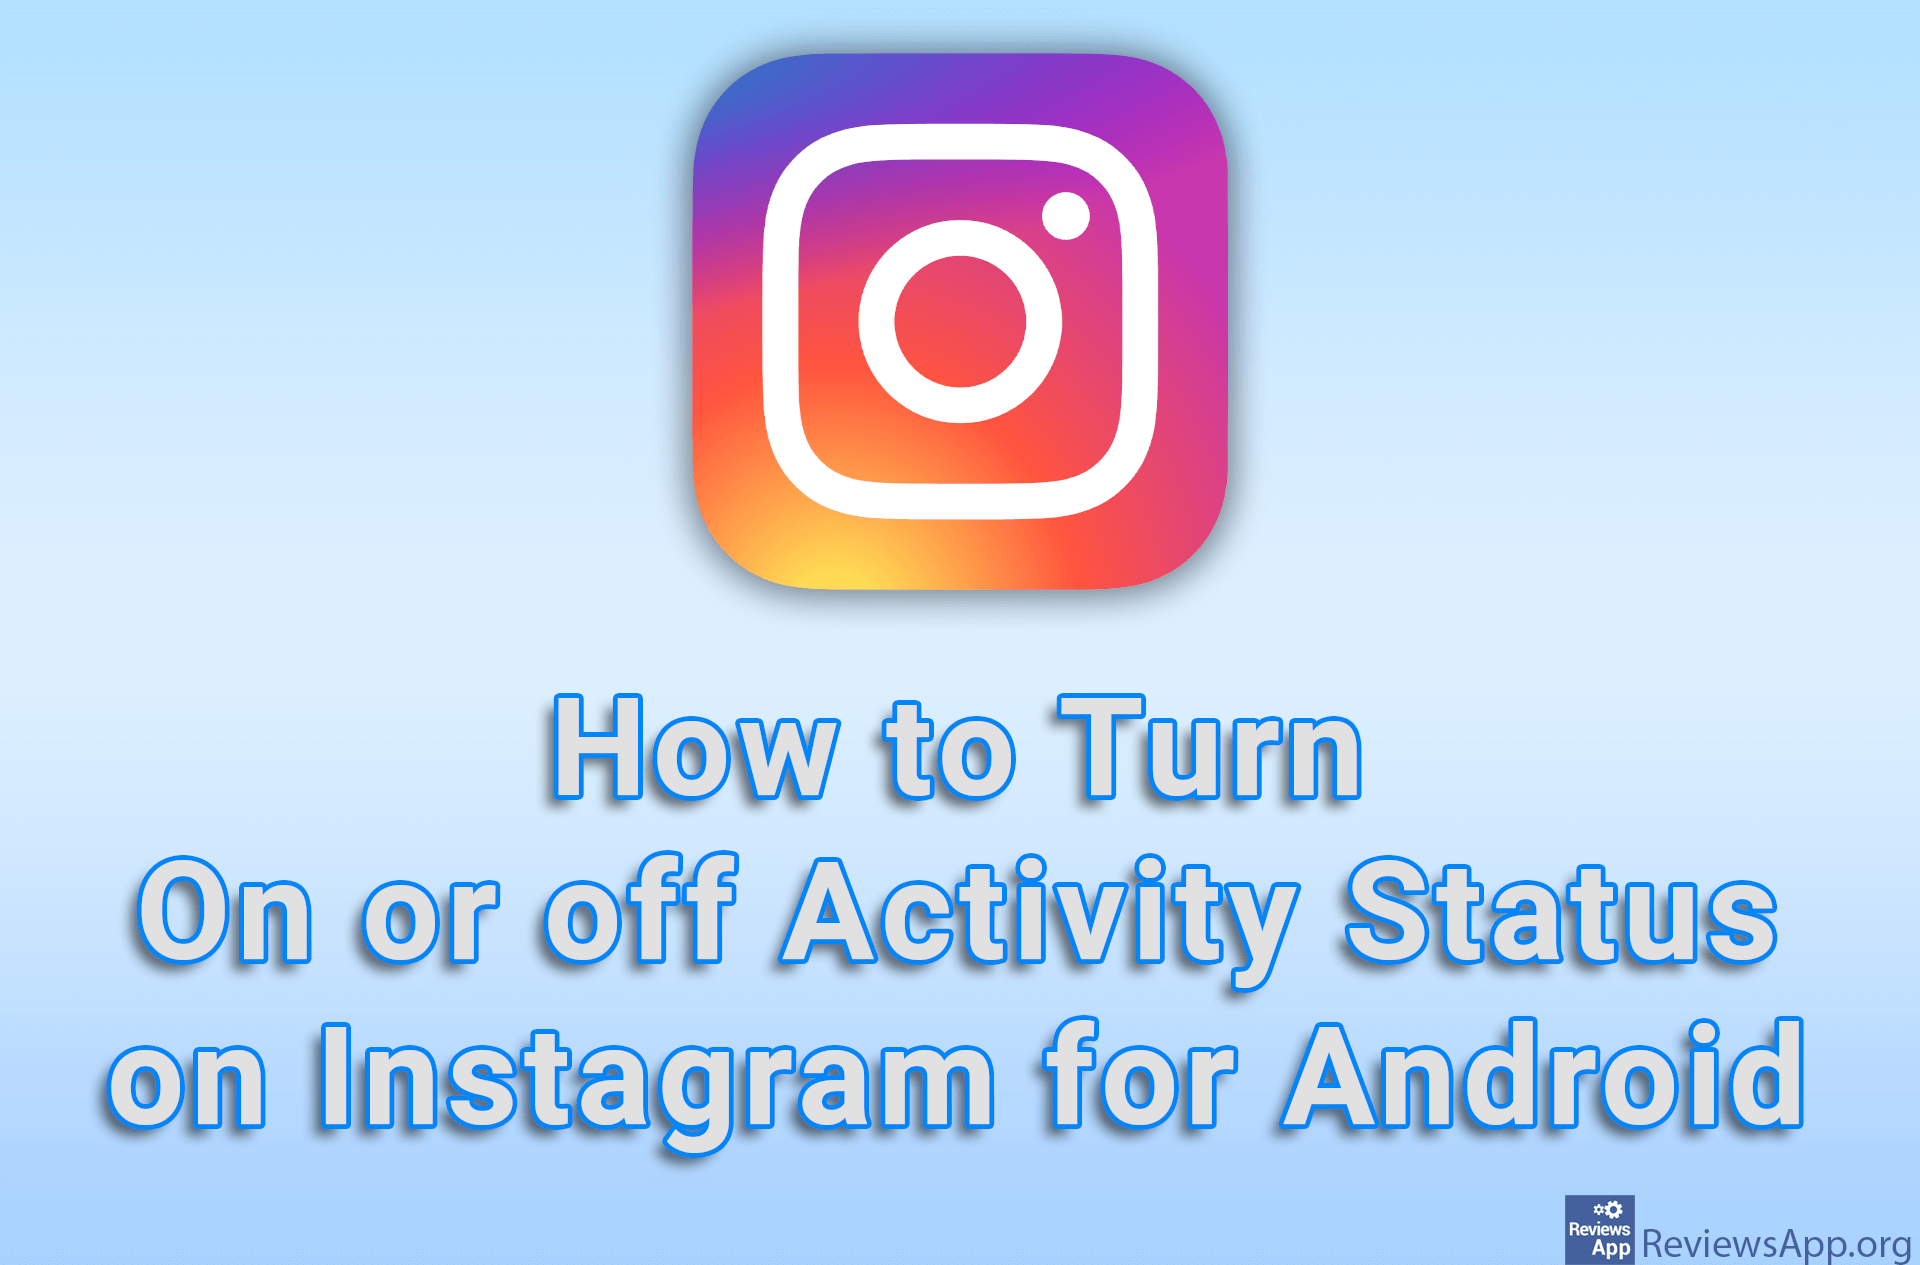 How to Turn On or off Activity Status on Instagram for Android